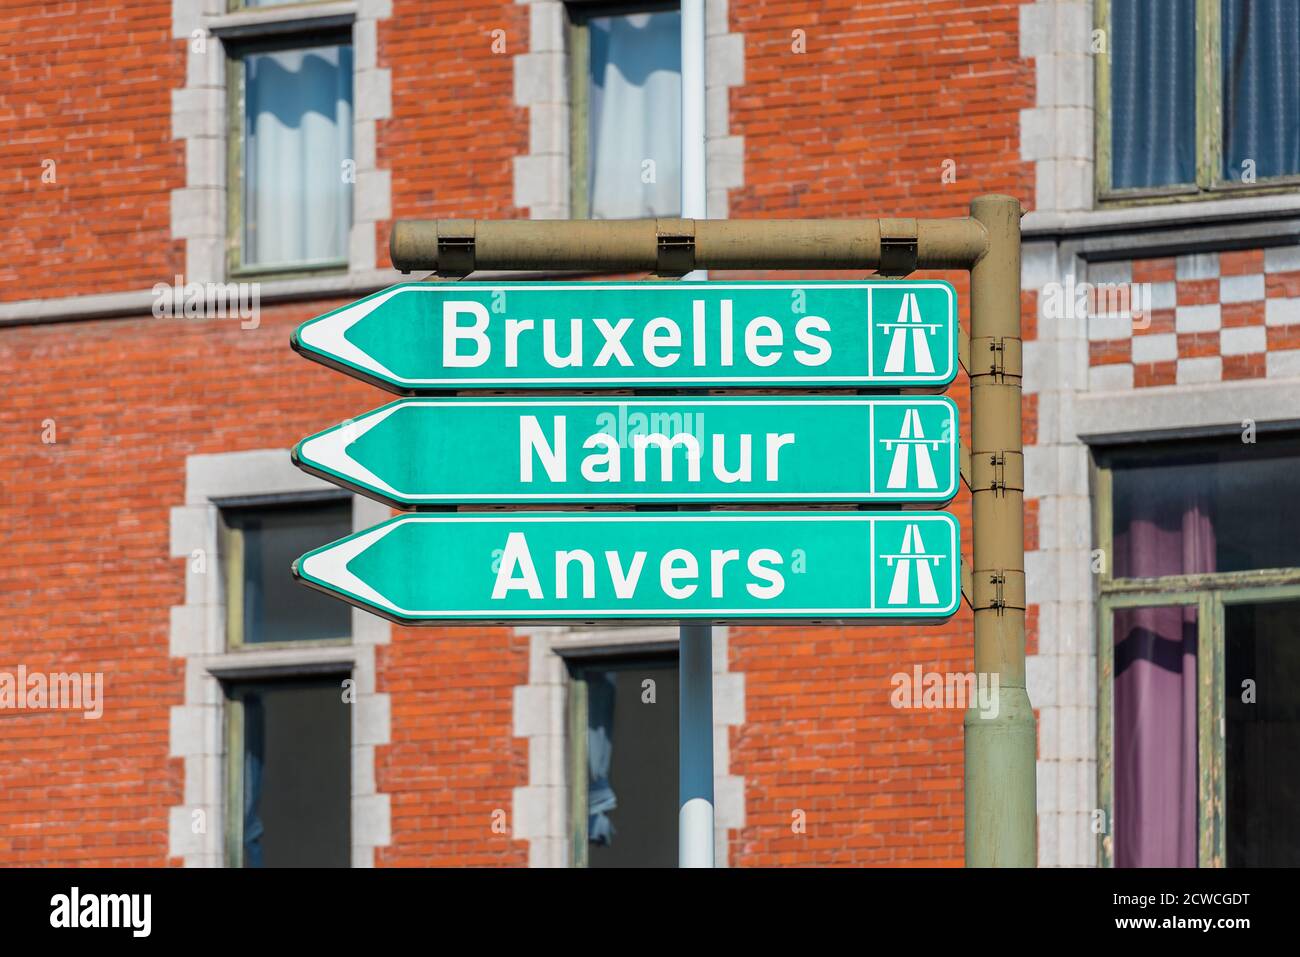 Directional Signs to Brussels, Namur and Antwerp in Liège Belgium Stock Photo